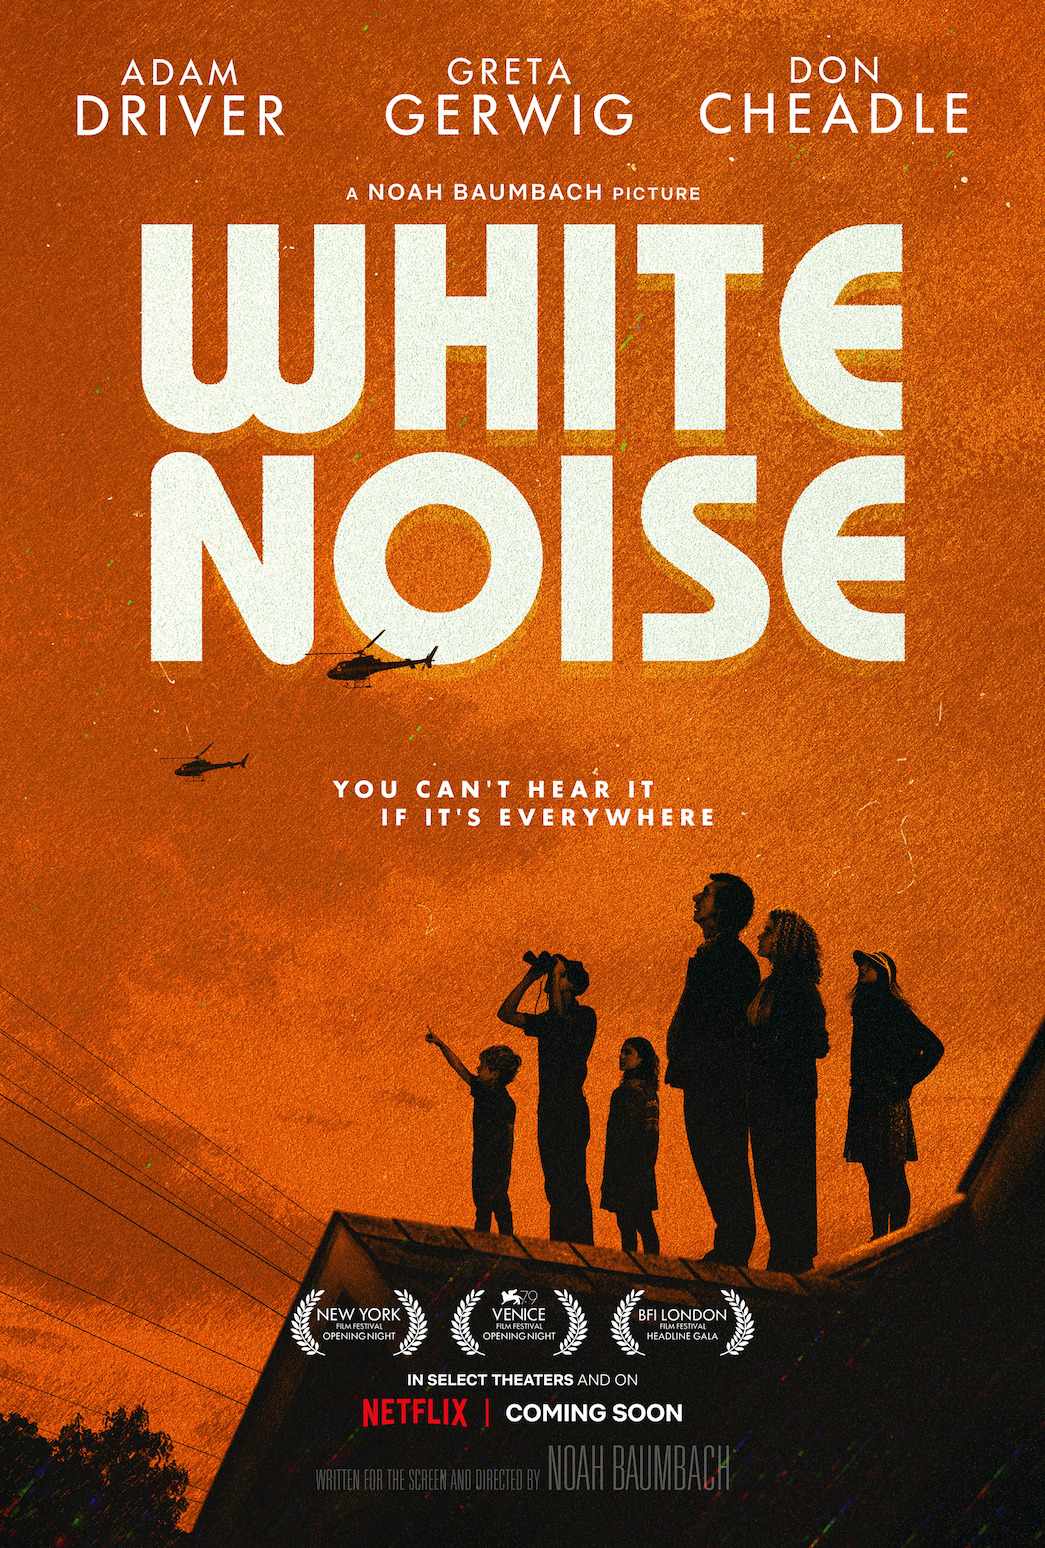 Will white noise premiere on Netflix in 2022?